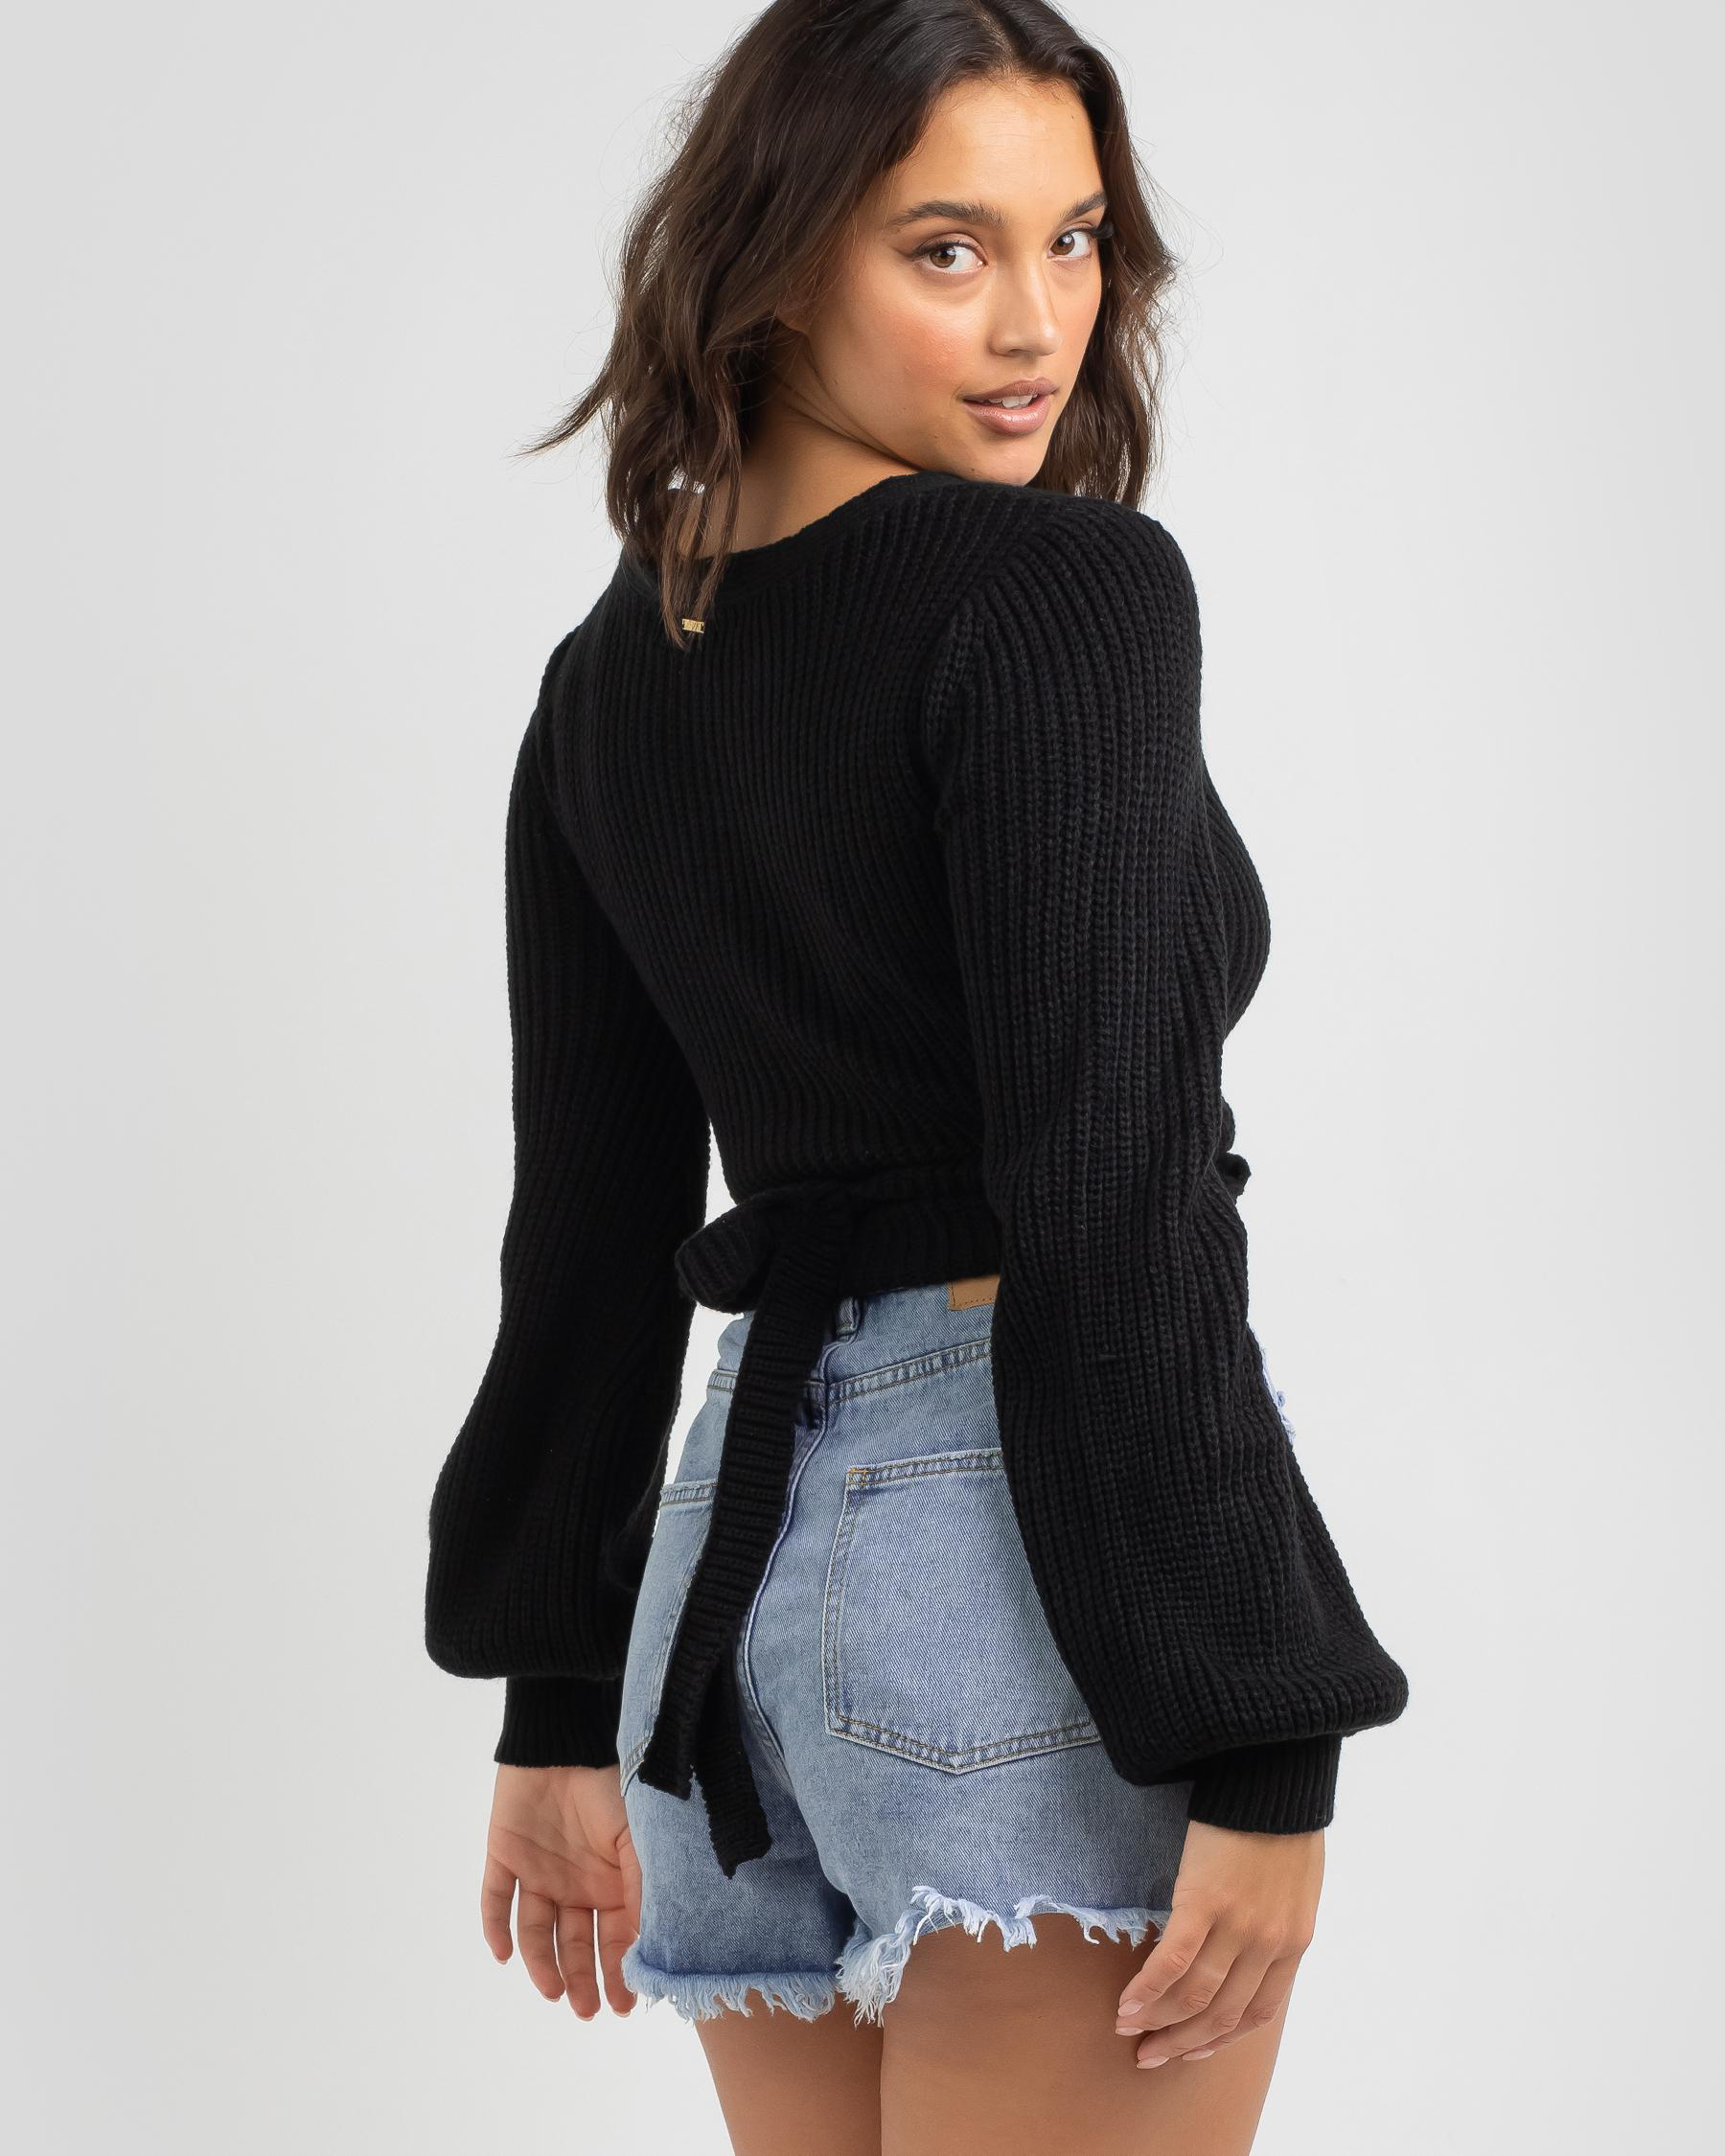 Shop Ava And Ever Missy Knit In Black - Fast Shipping & Easy Returns ...